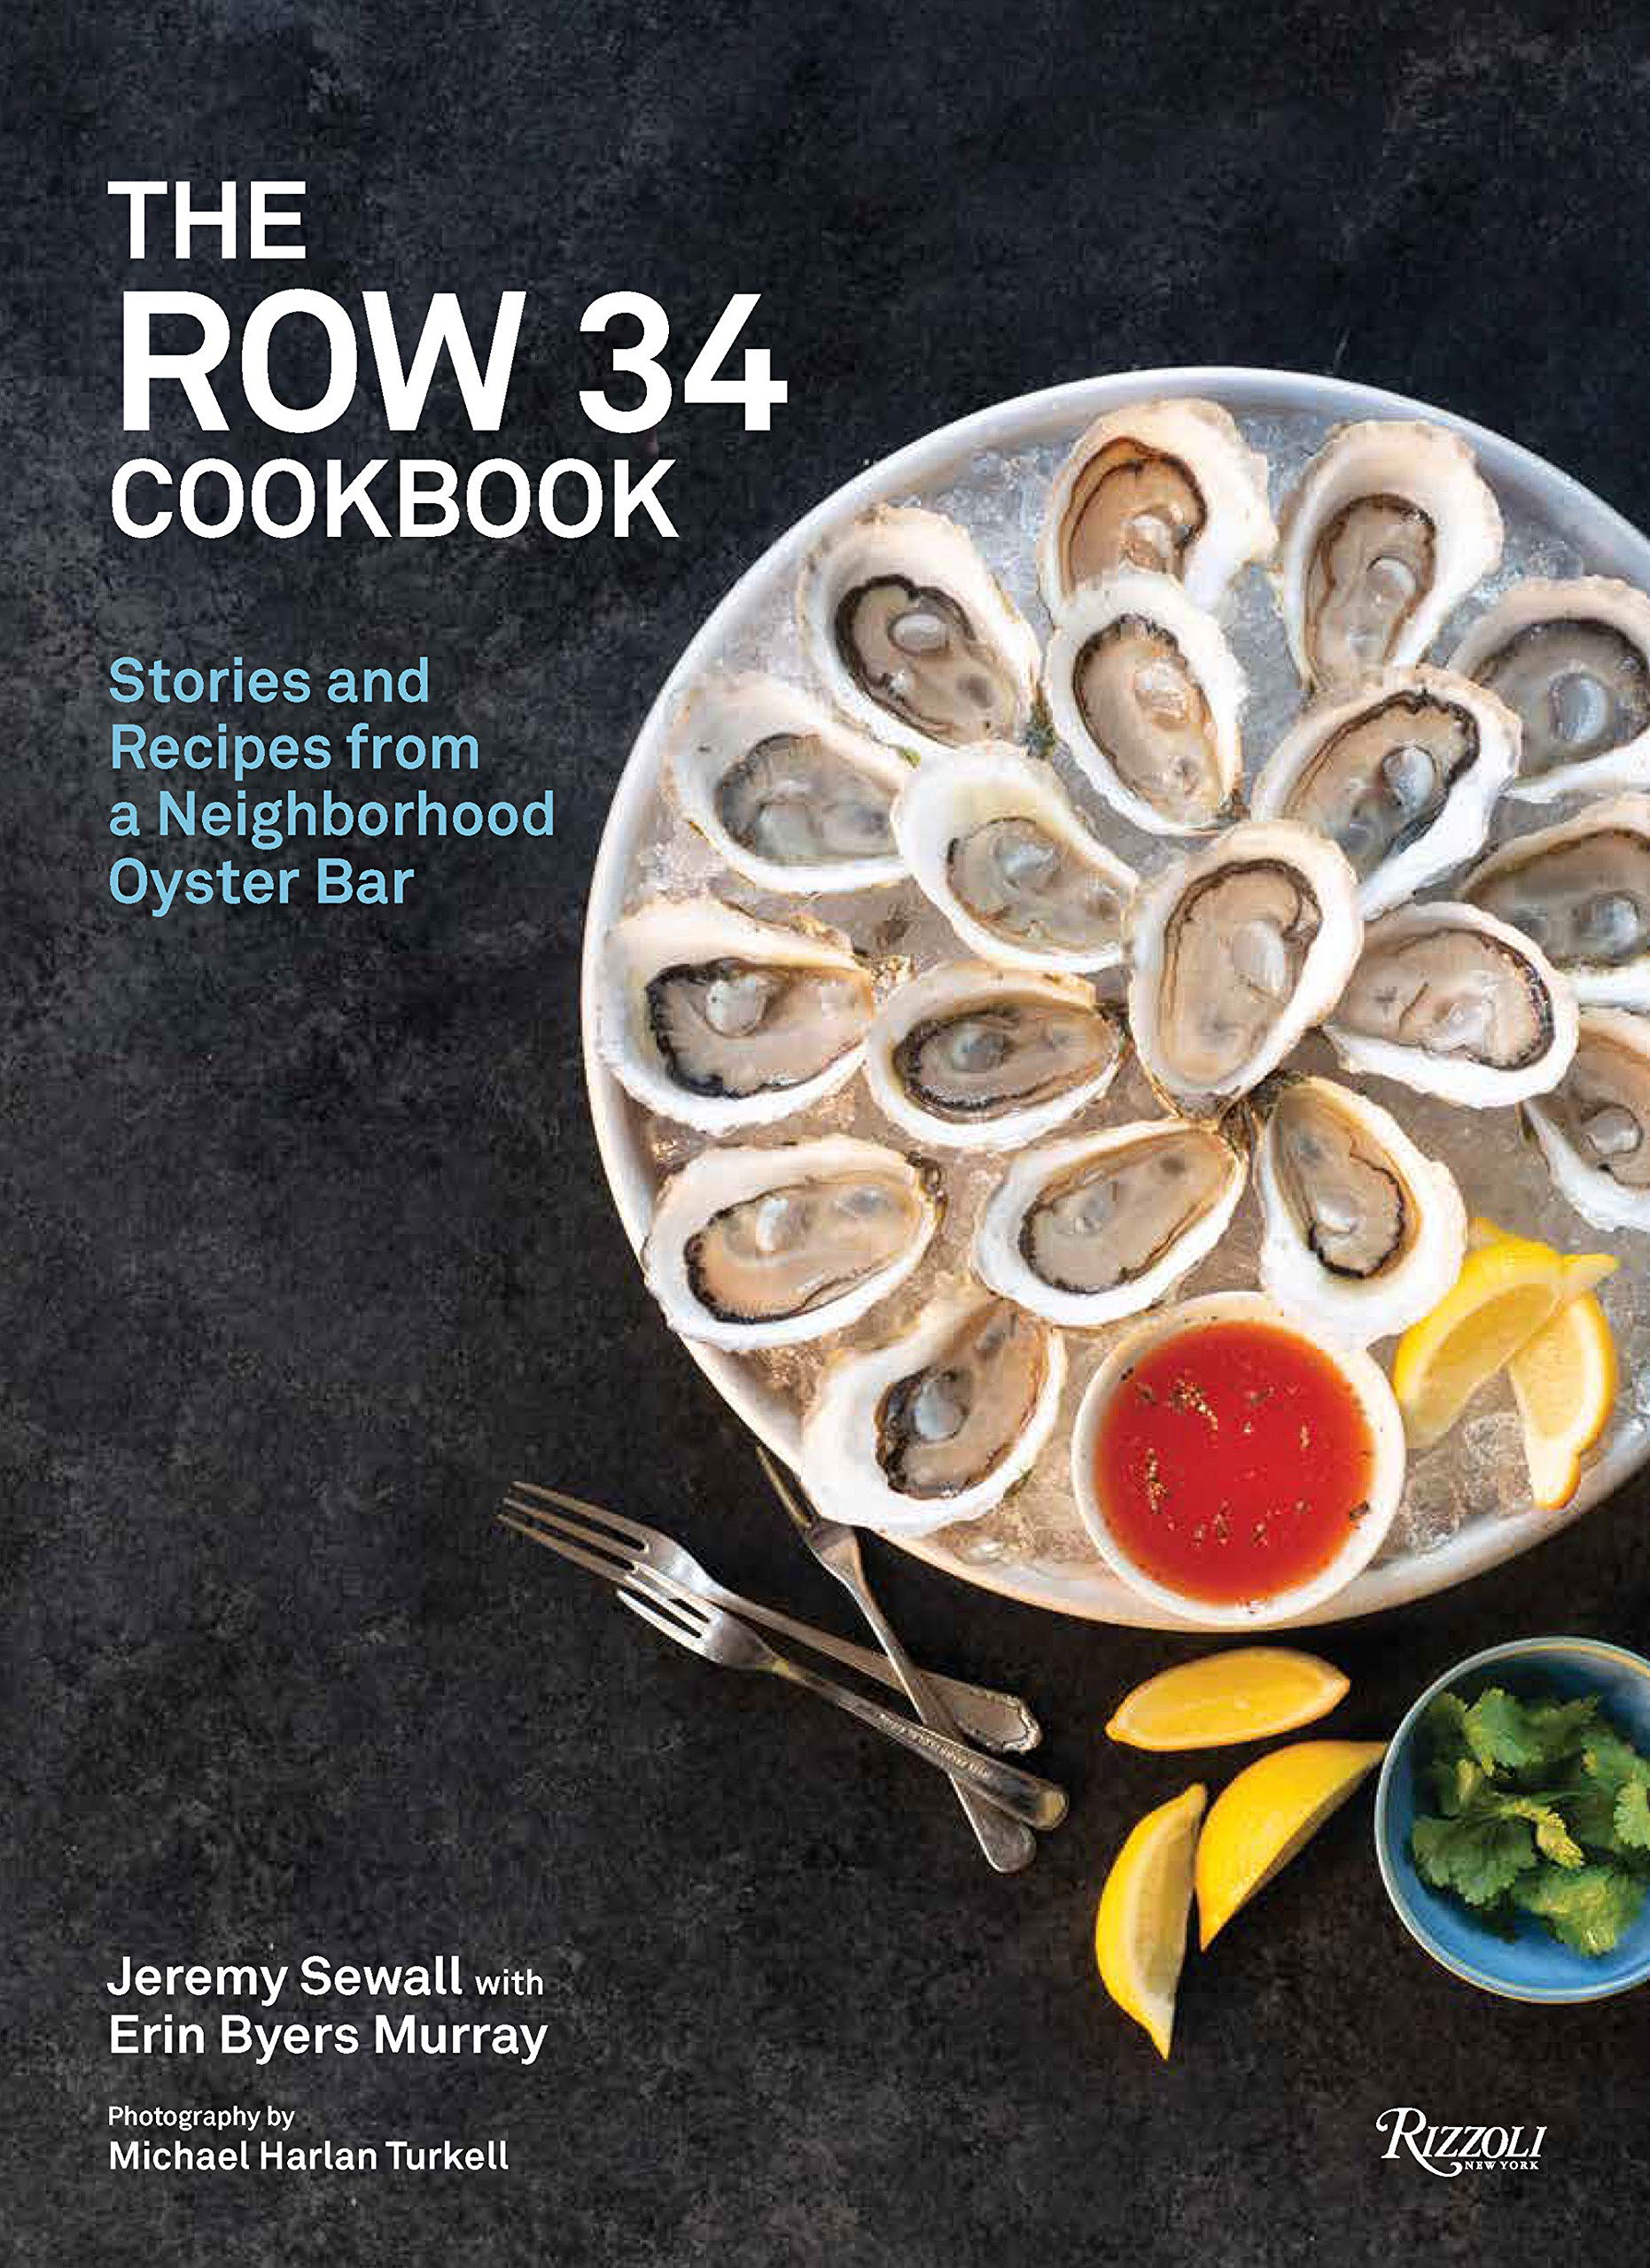 The Row 34 Cookbook: Stories and Recipes from a Neighborhood Oyster Bar (Jeremy Sewall, Erin Byers Murray)